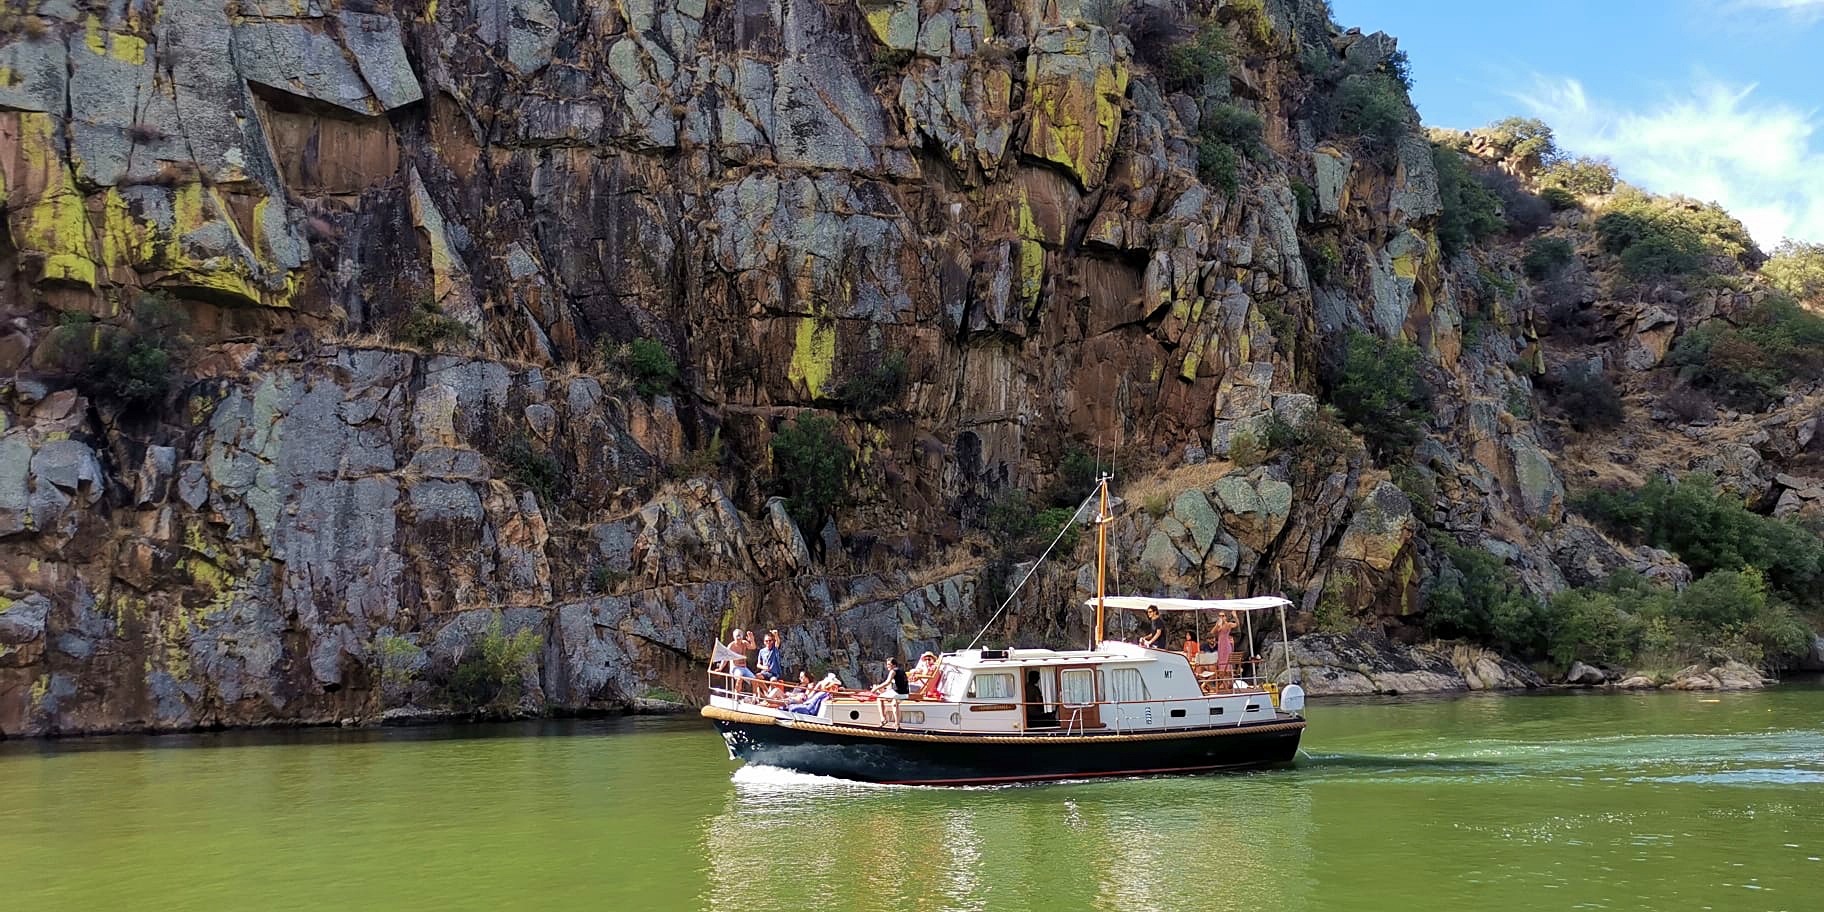 Have a fun time onboard and discover the Douro Valley